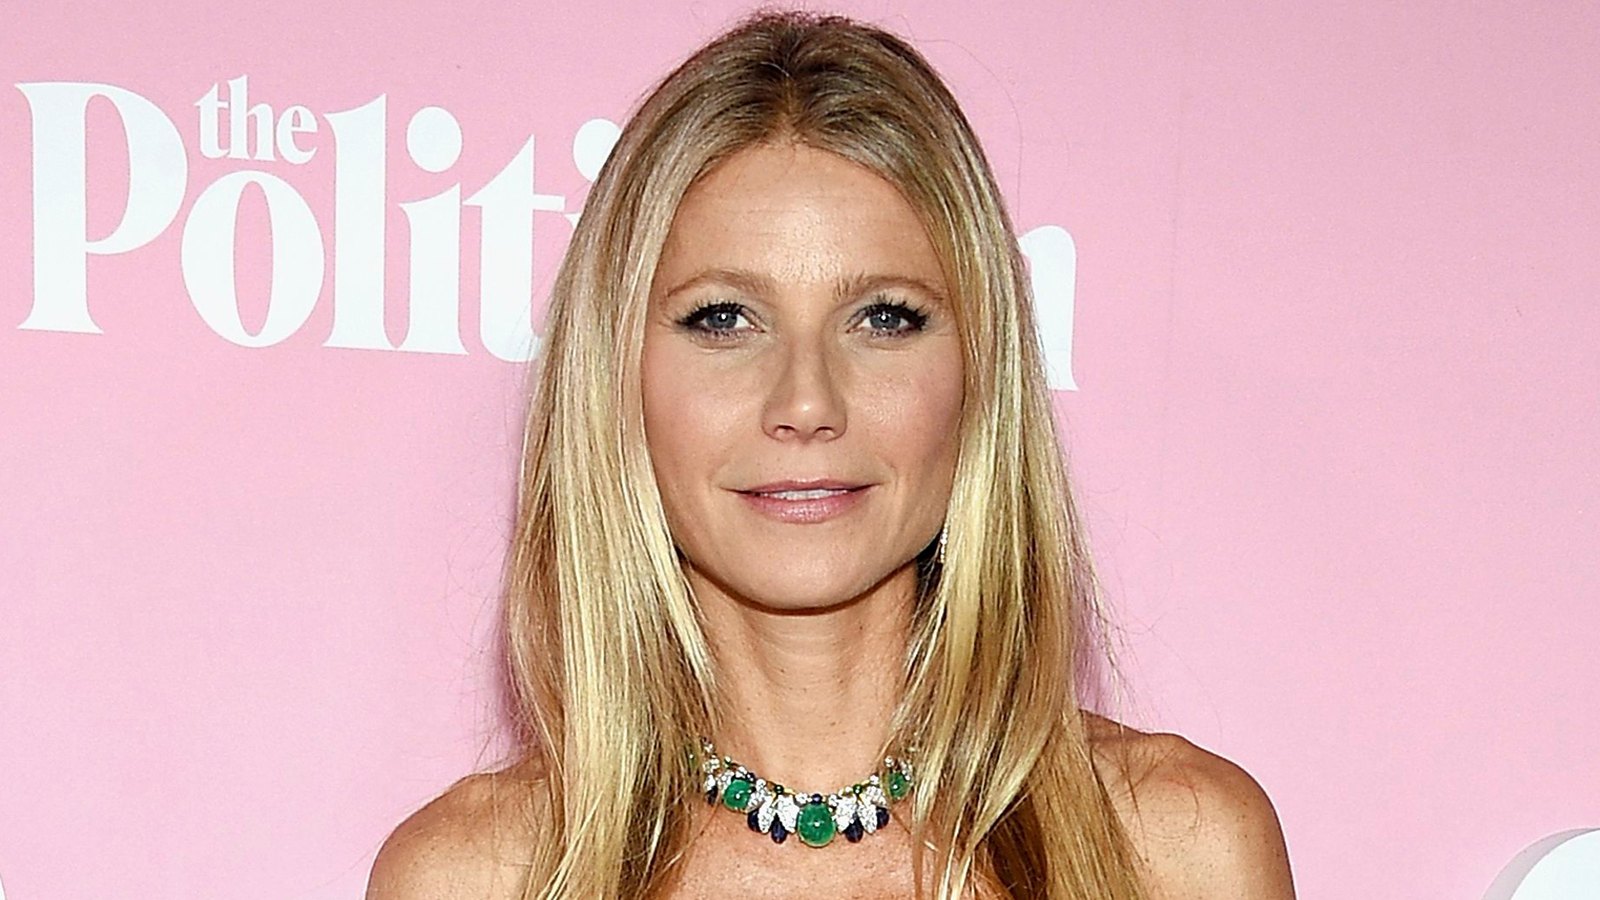 Gwyneth Paltrow Celebrates Son Moses’ 14th Birthday: ‘This Kid Is the Best’